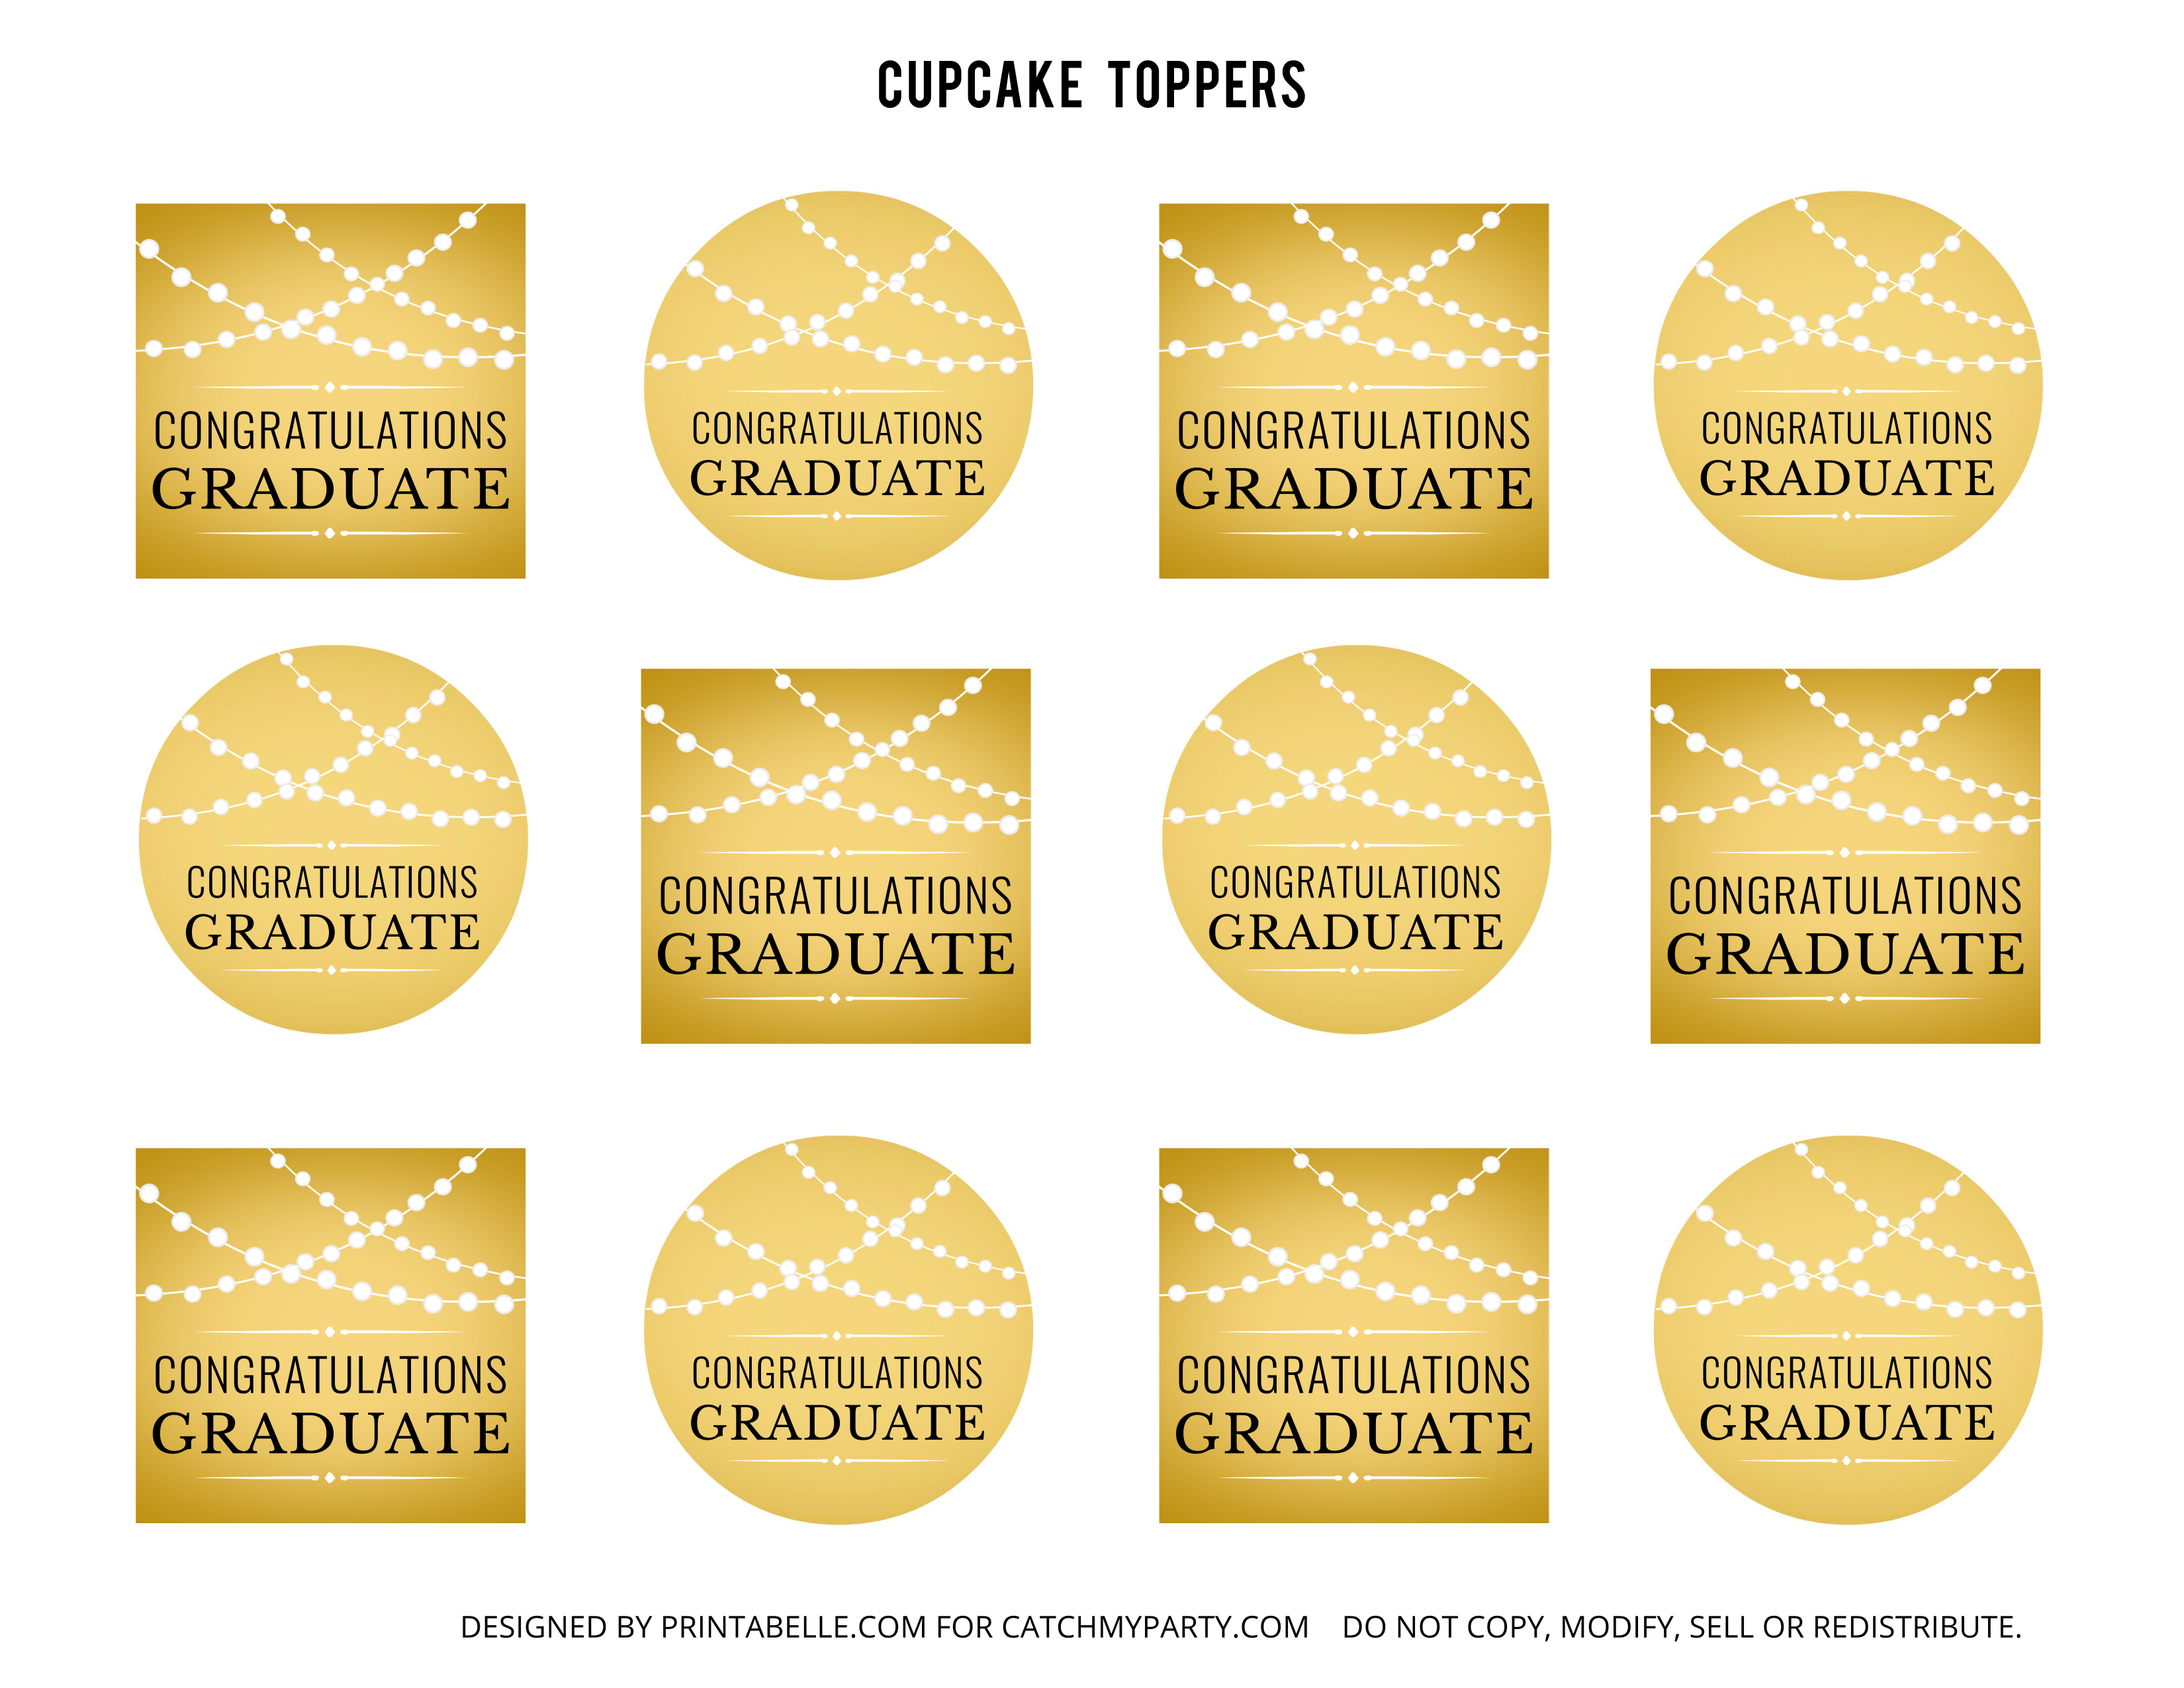 Free Gold Graduation Printables | Catch My Party - Free Printable Graduation Cupcake Toppers